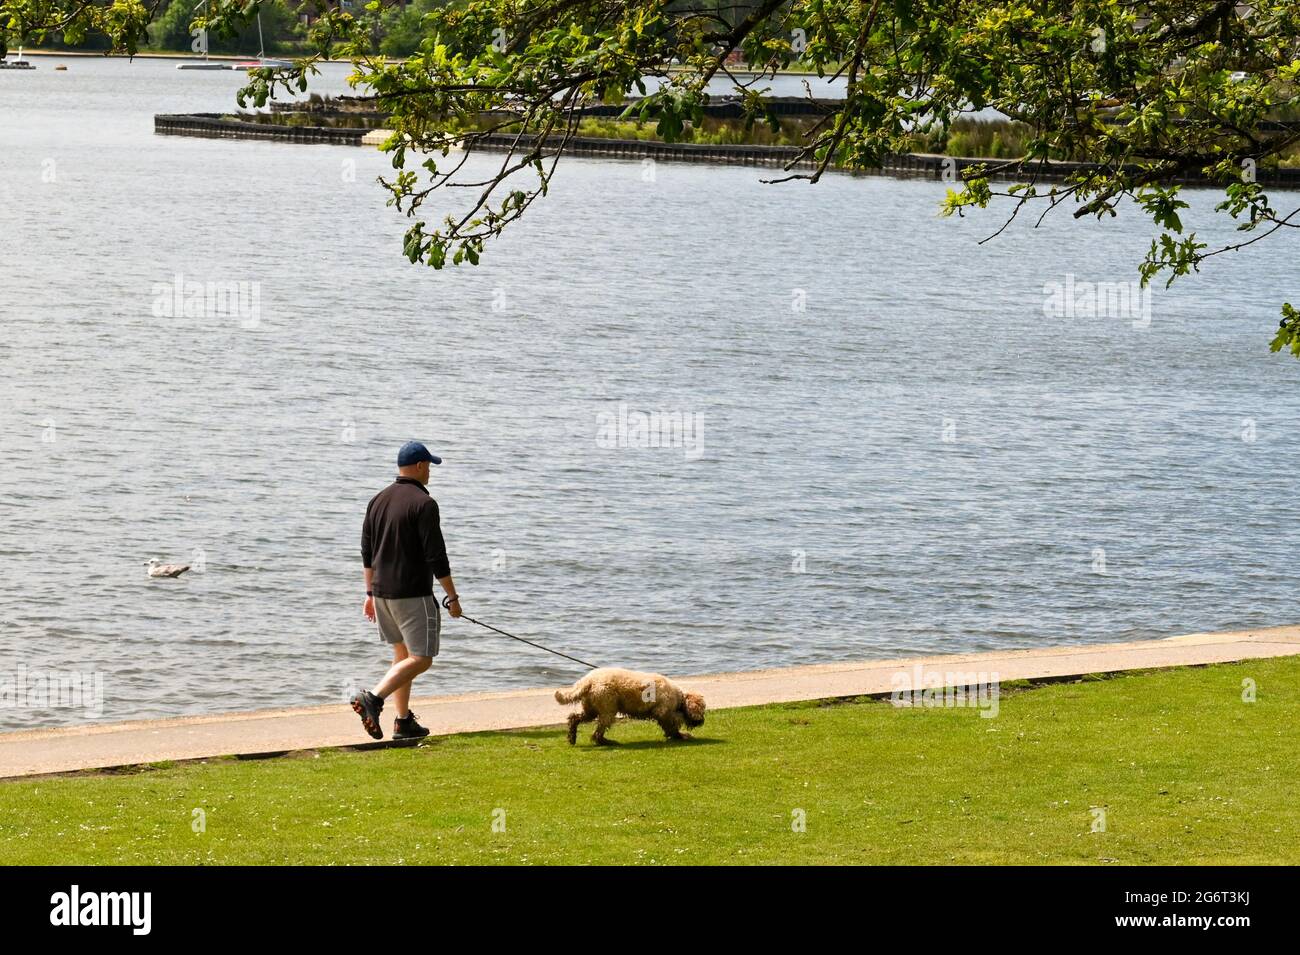 Poole, Dorset, England - June 2021: Person walking a dog alongside the lake in a public park in Poole. Stock Photo